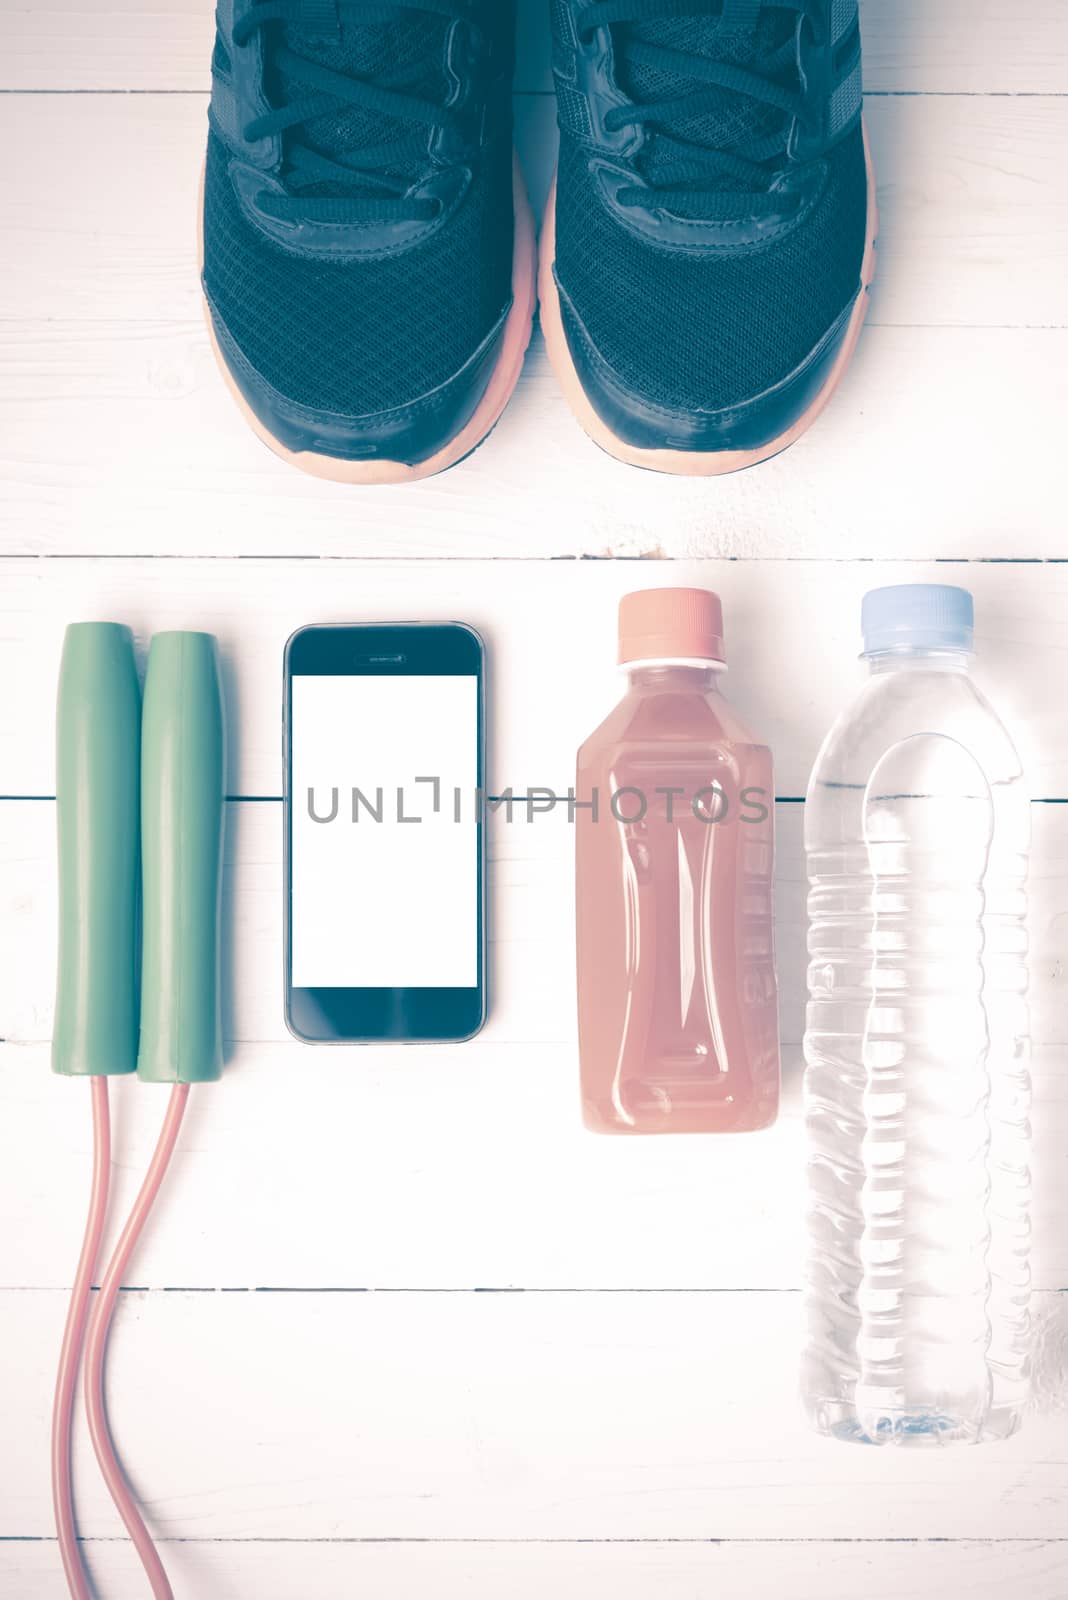 fitness equipment : running shoes,jumping rope,water,juice and phone on white wood background vintage style